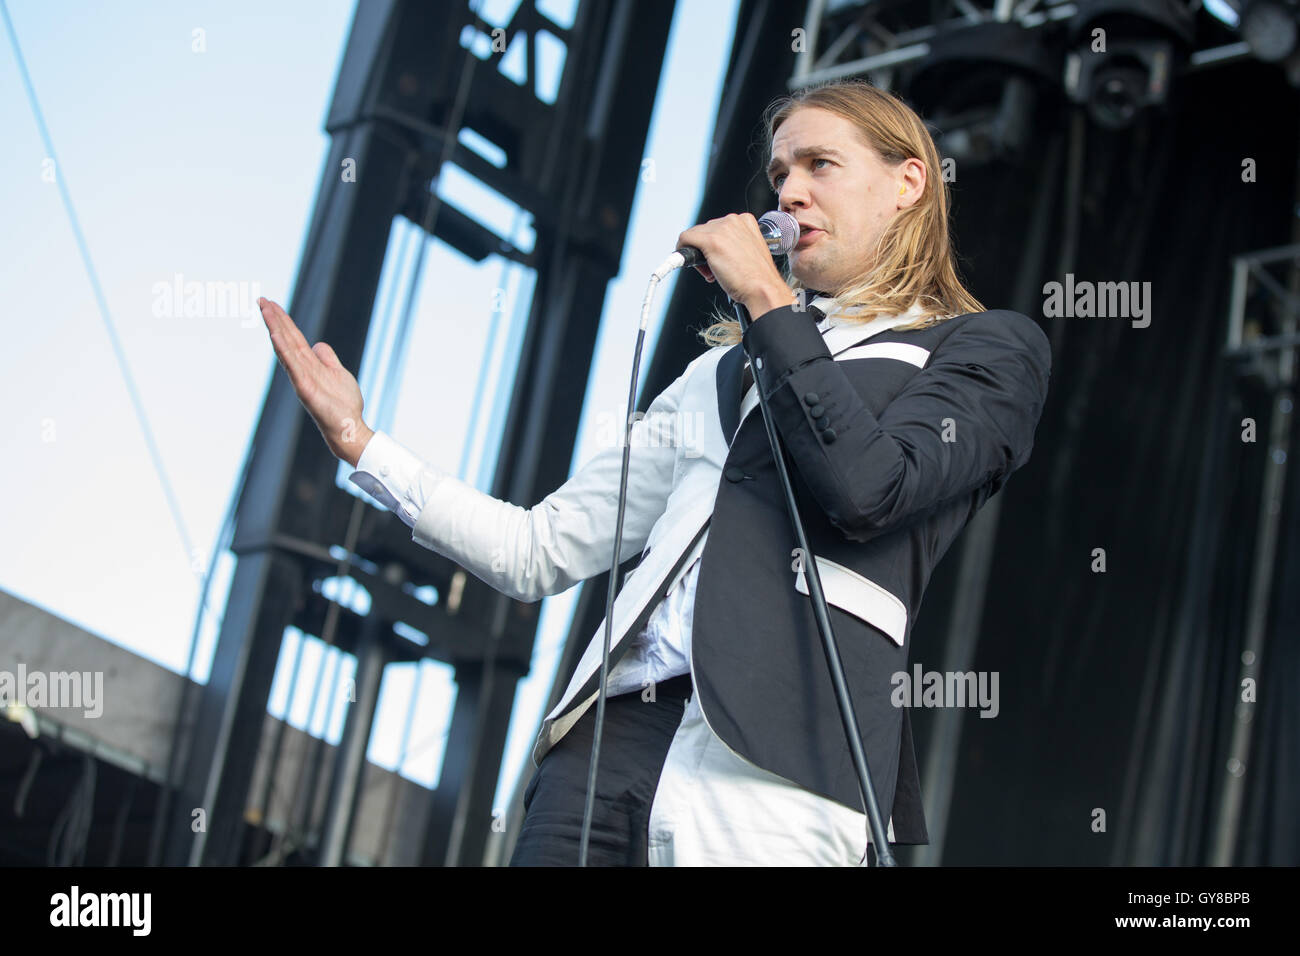 Chicago, Illinois, USA. 17th Sep, 2016. HOWLIN' PELLE ALMQVIST (PER ALMQVIST) of The Hives performs live at Douglas Park during Riot Fest in Chicago, Illinois Credit:  Daniel DeSlover/ZUMA Wire/Alamy Live News Stock Photo